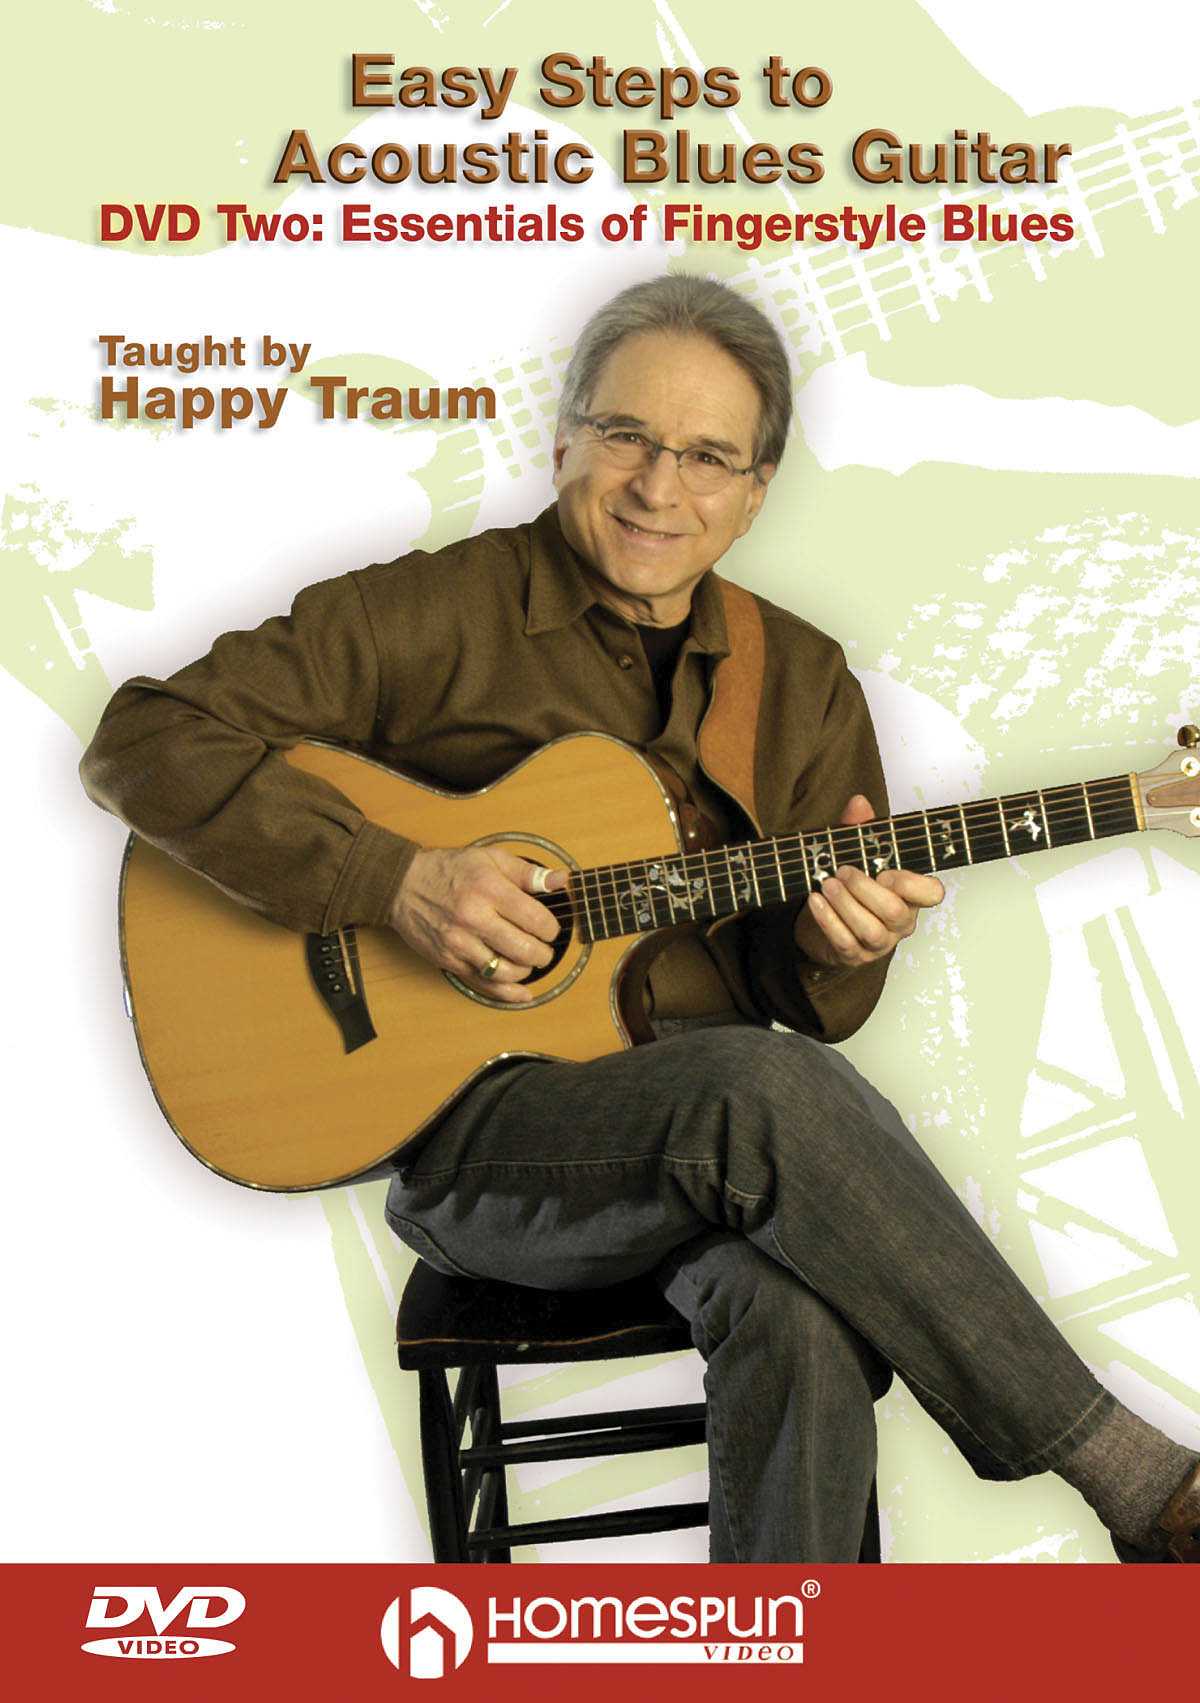 Image 1 of DVD - Easy Steps to Acoustic Blues Guitar: Vol. 2 - Essentials of Fingerstyle Blues - SKU# 300-DVD191 : Product Type Media : Elderly Instruments